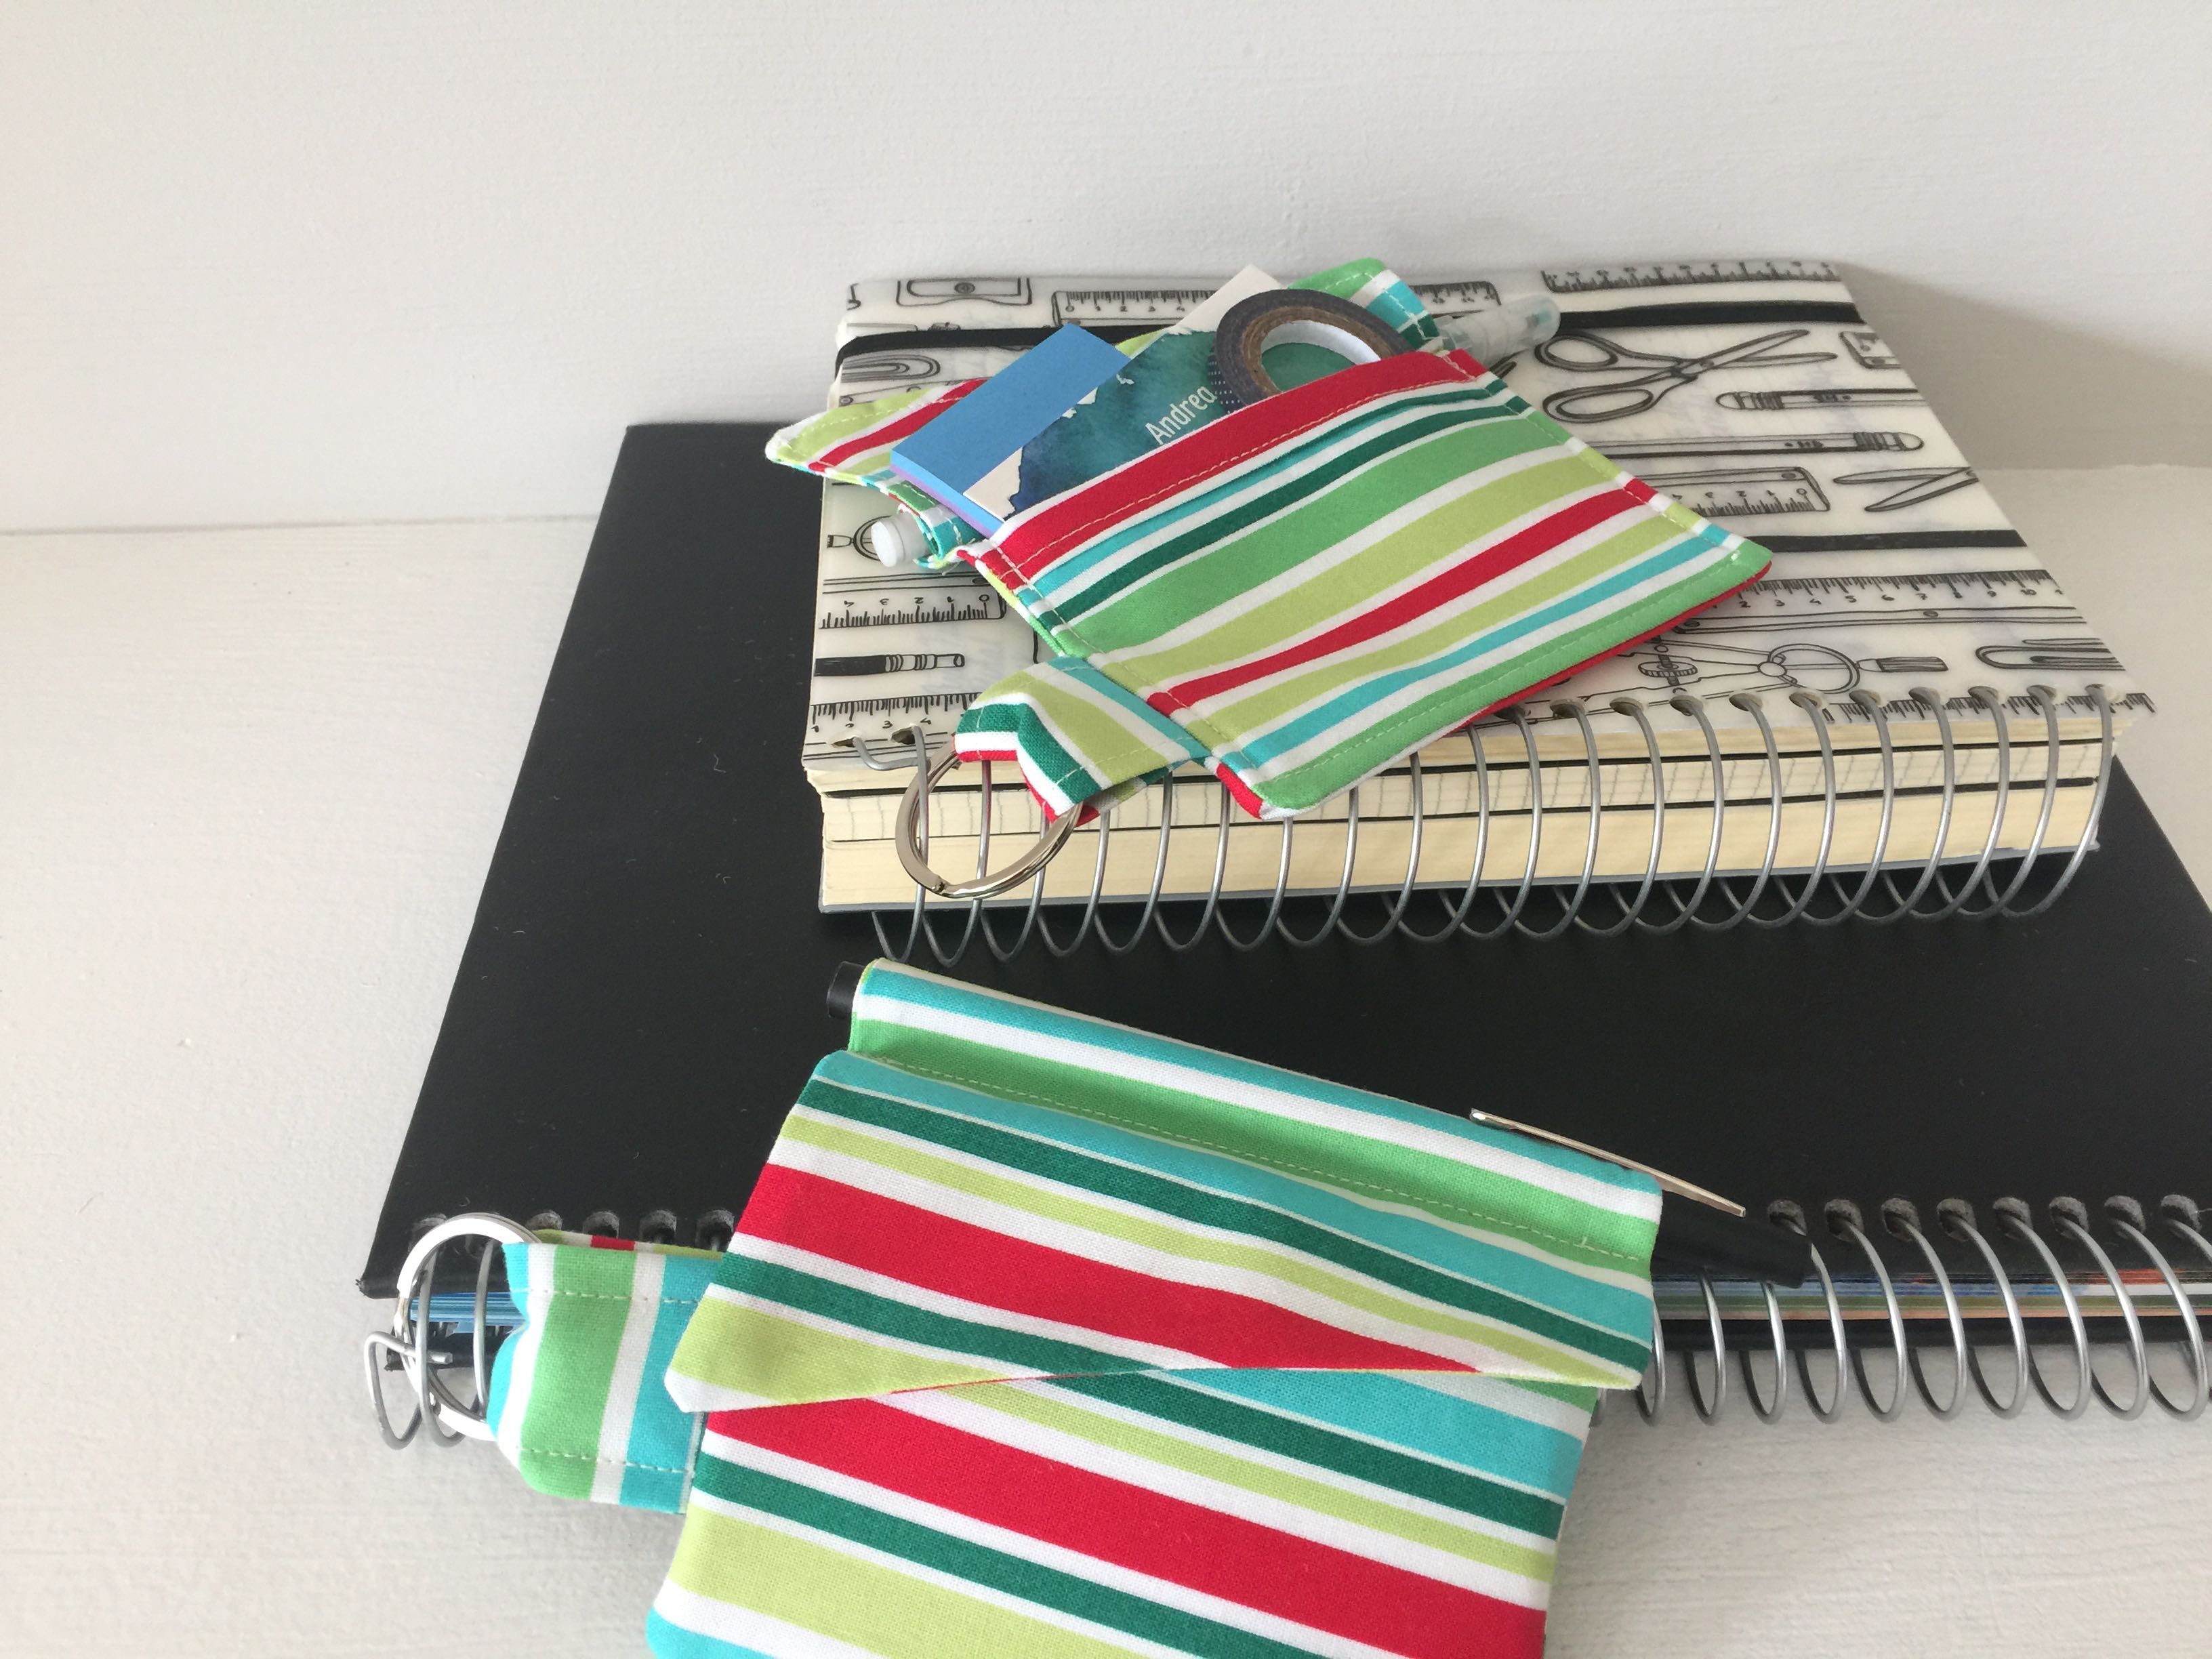 How to sew a planner pocket